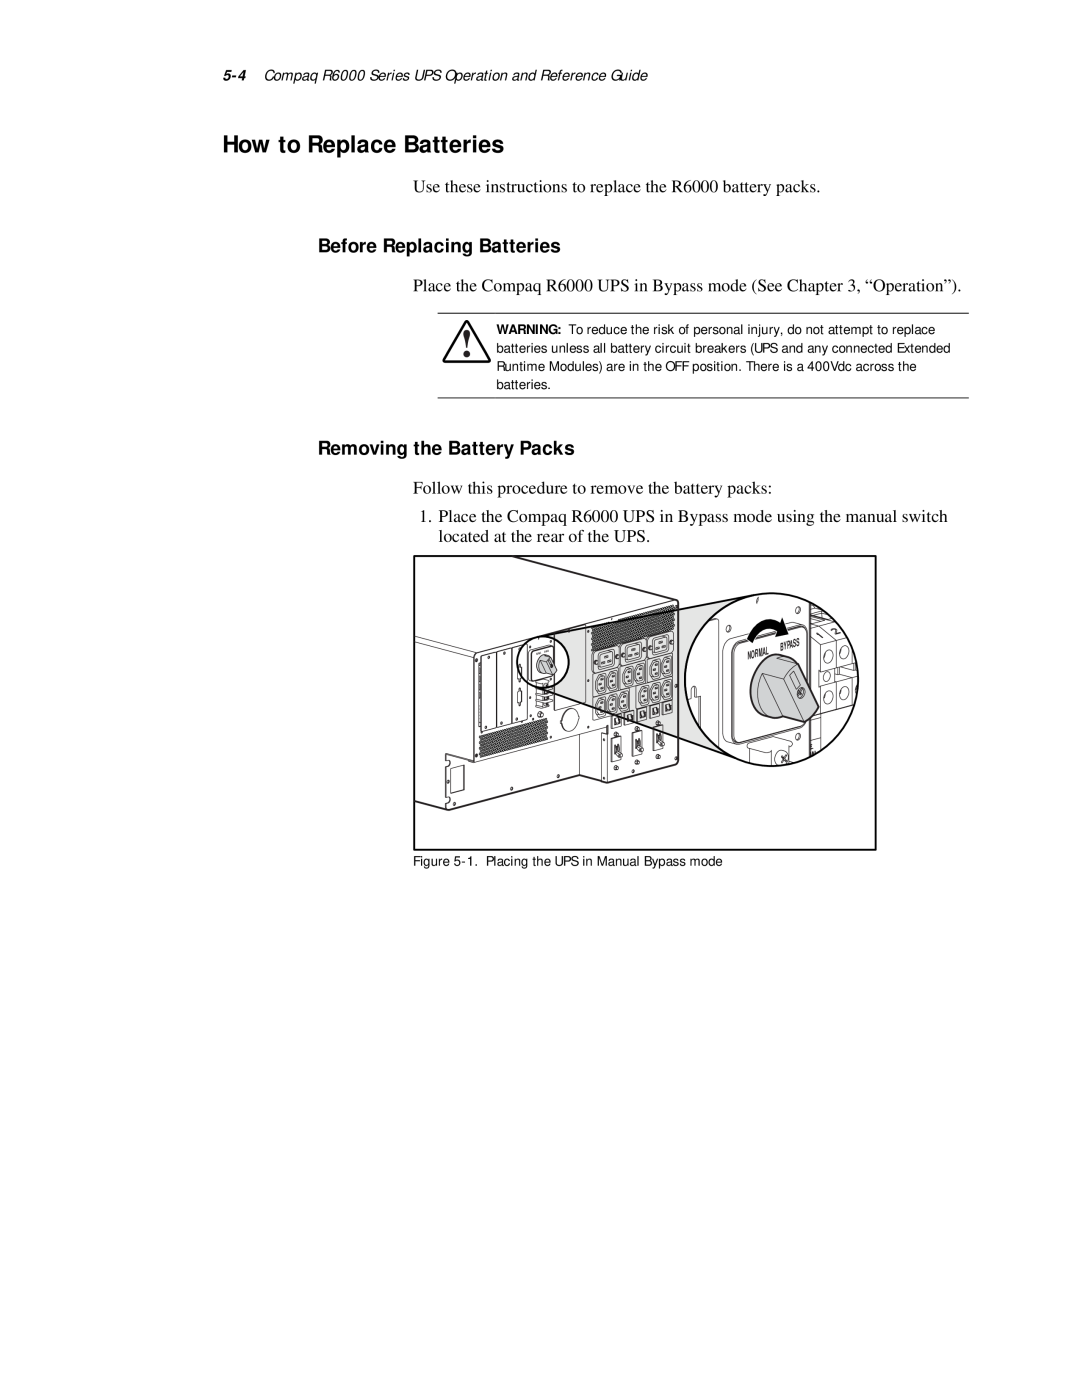 Compaq R6000 Series manual How to Replace Batteries, Before Replacing Batteries, Removing the Battery Packs 